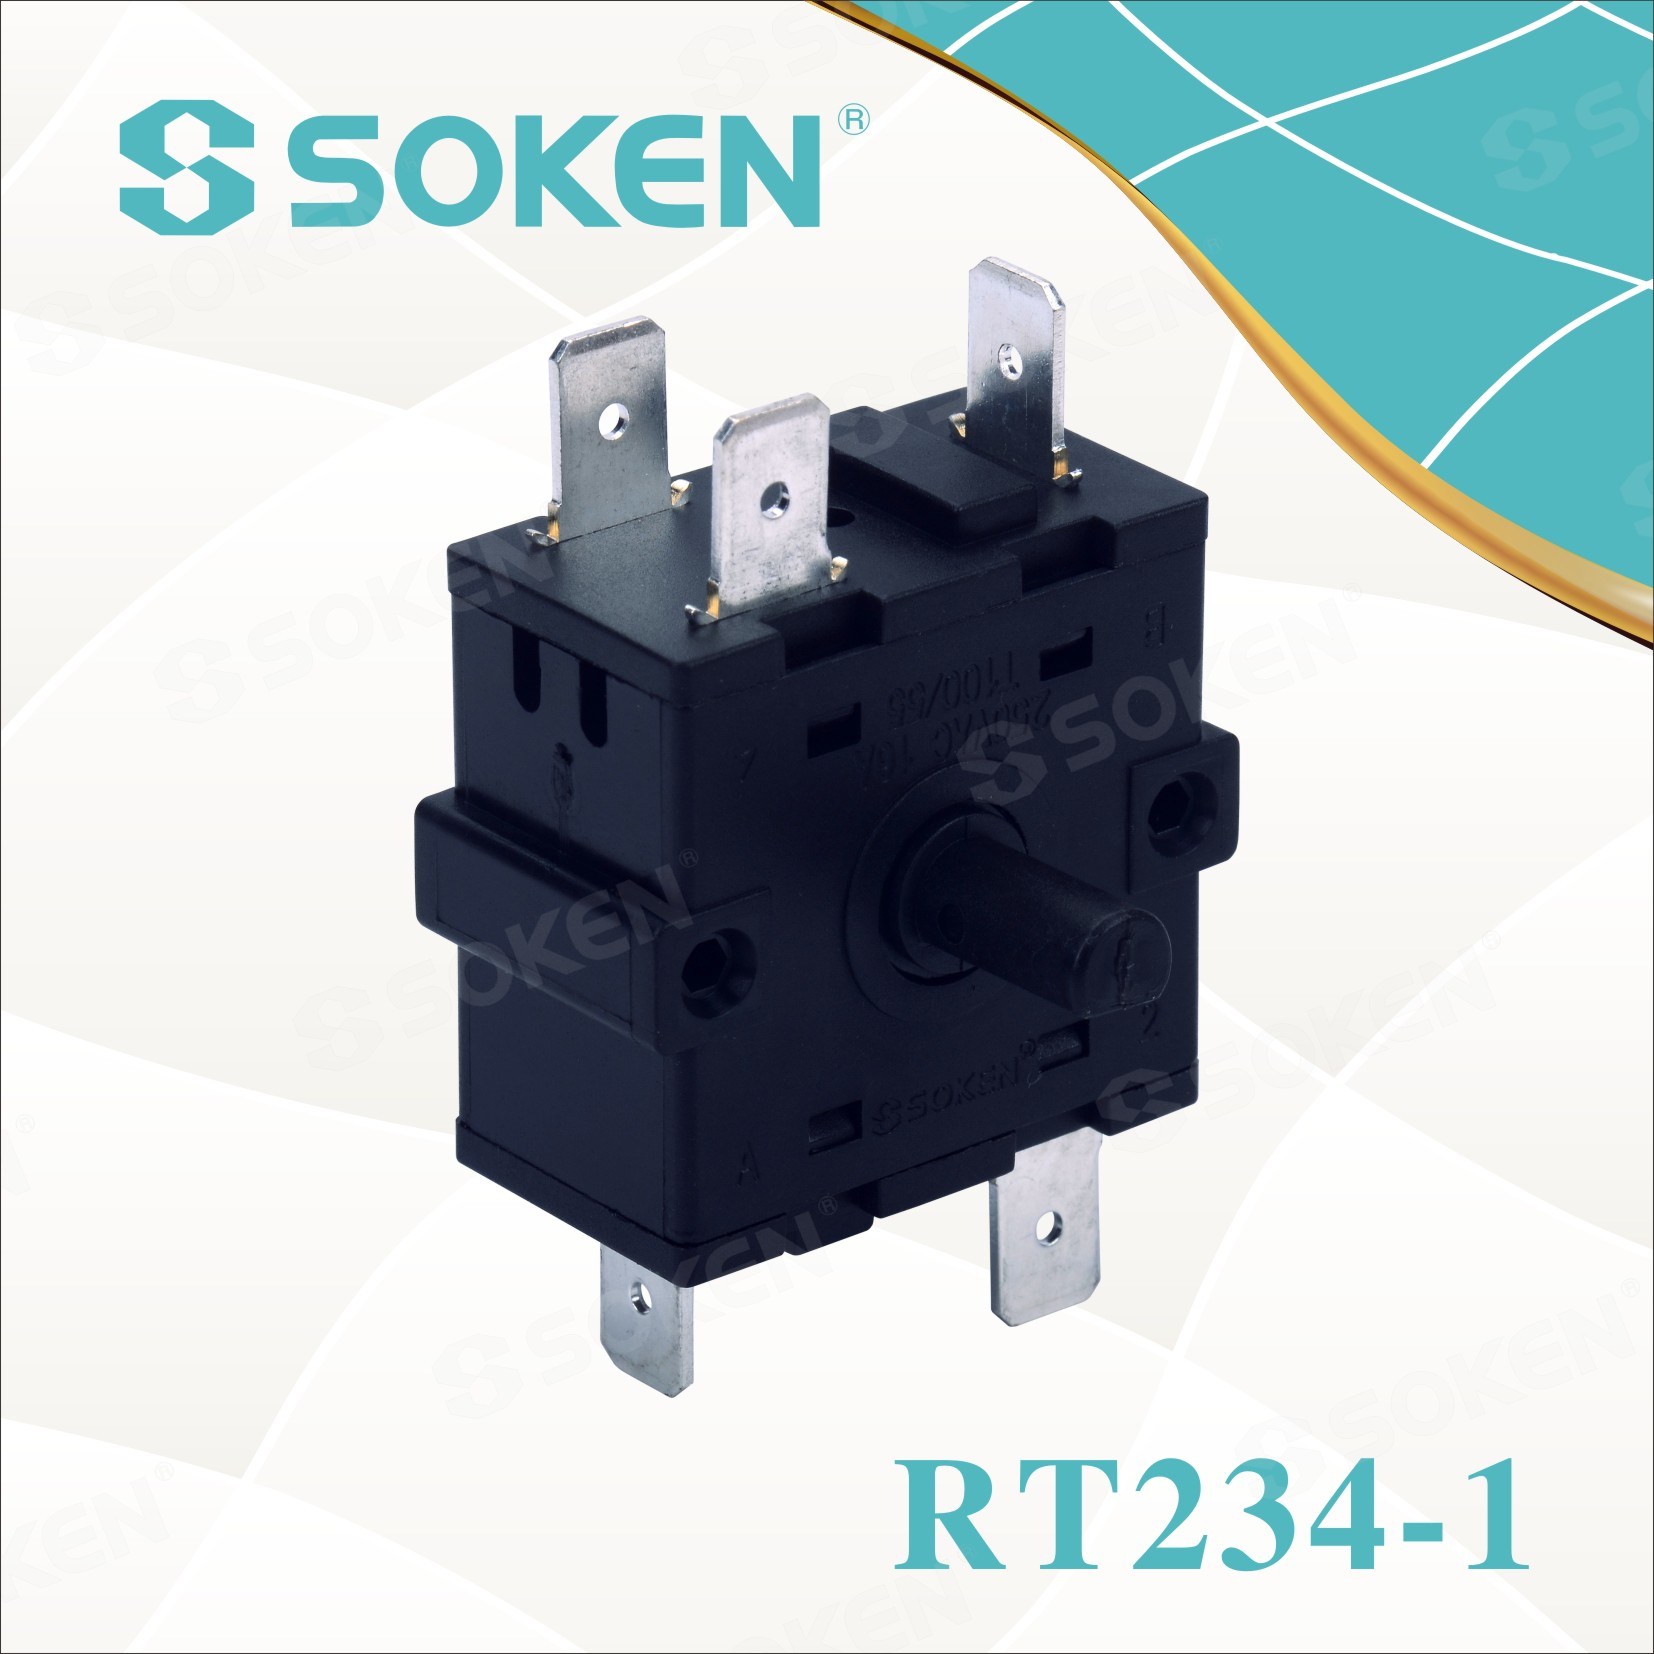 Soken Electrical Rotary Switch